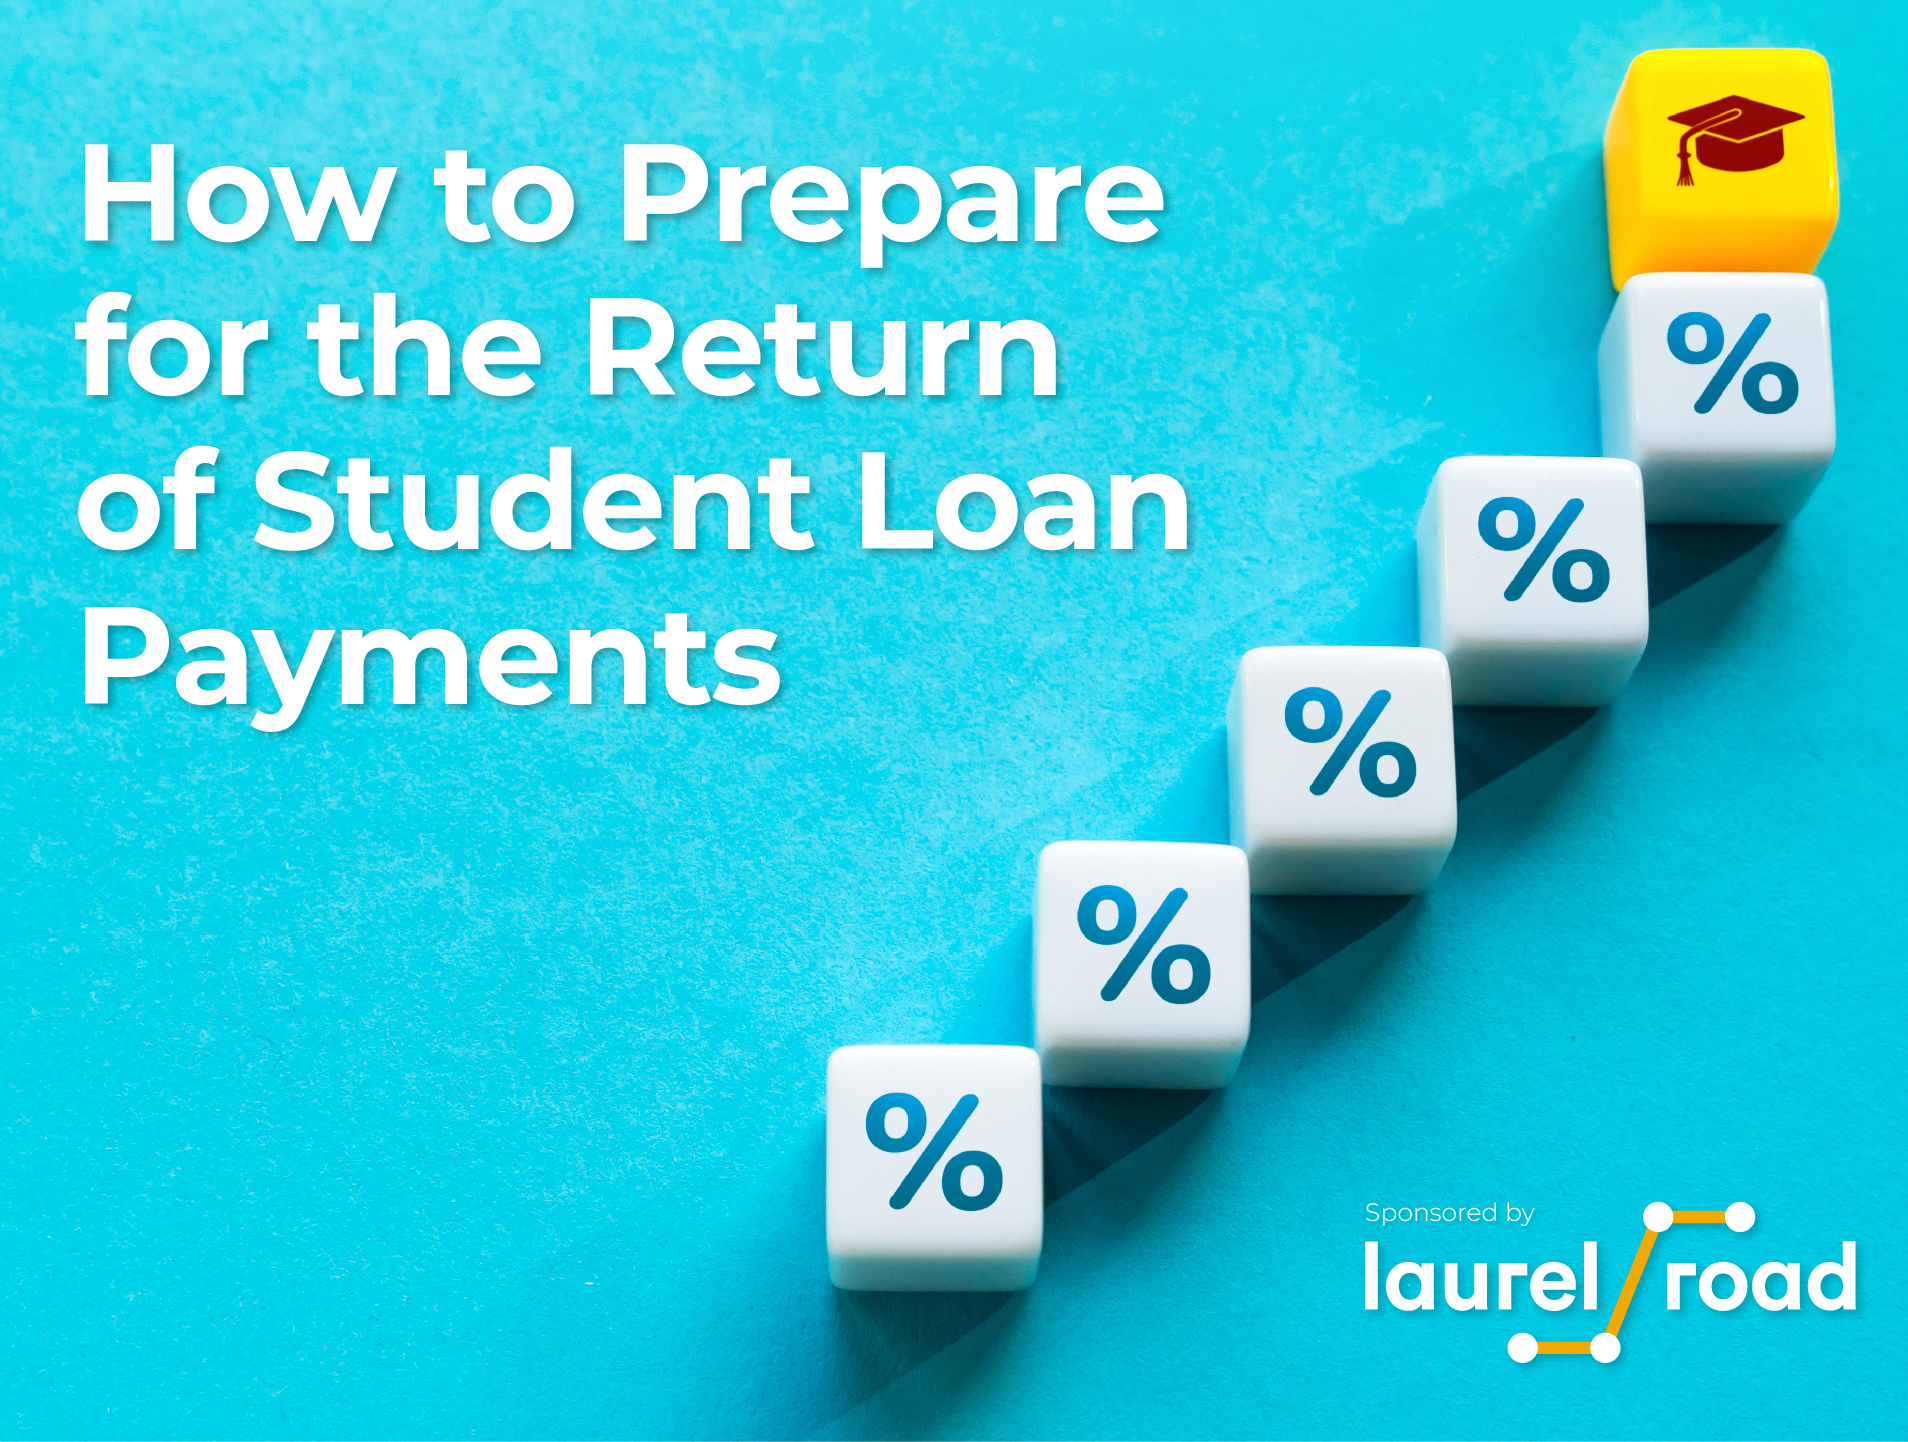 How to Prepare for the Return of Student Loan Payments